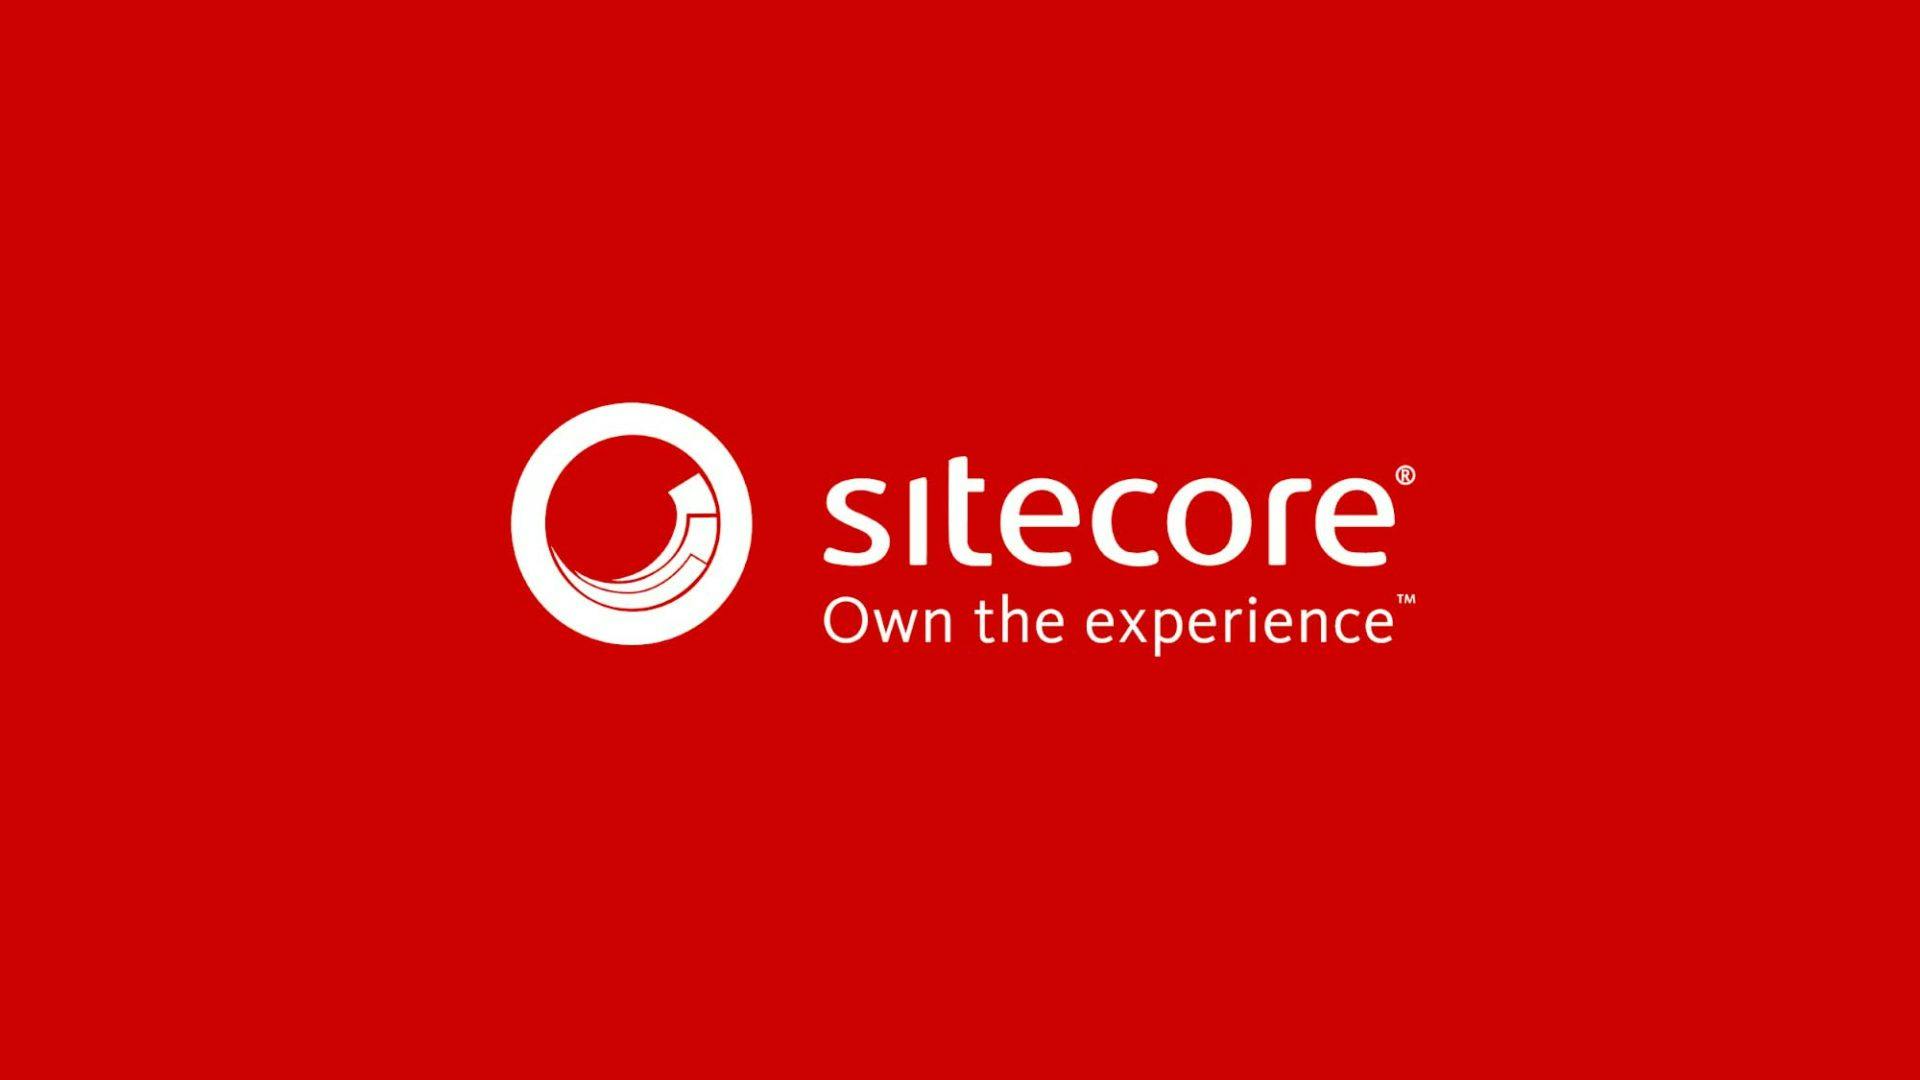 Cover Image for Why upgrade to Sitecore XP 8.2?